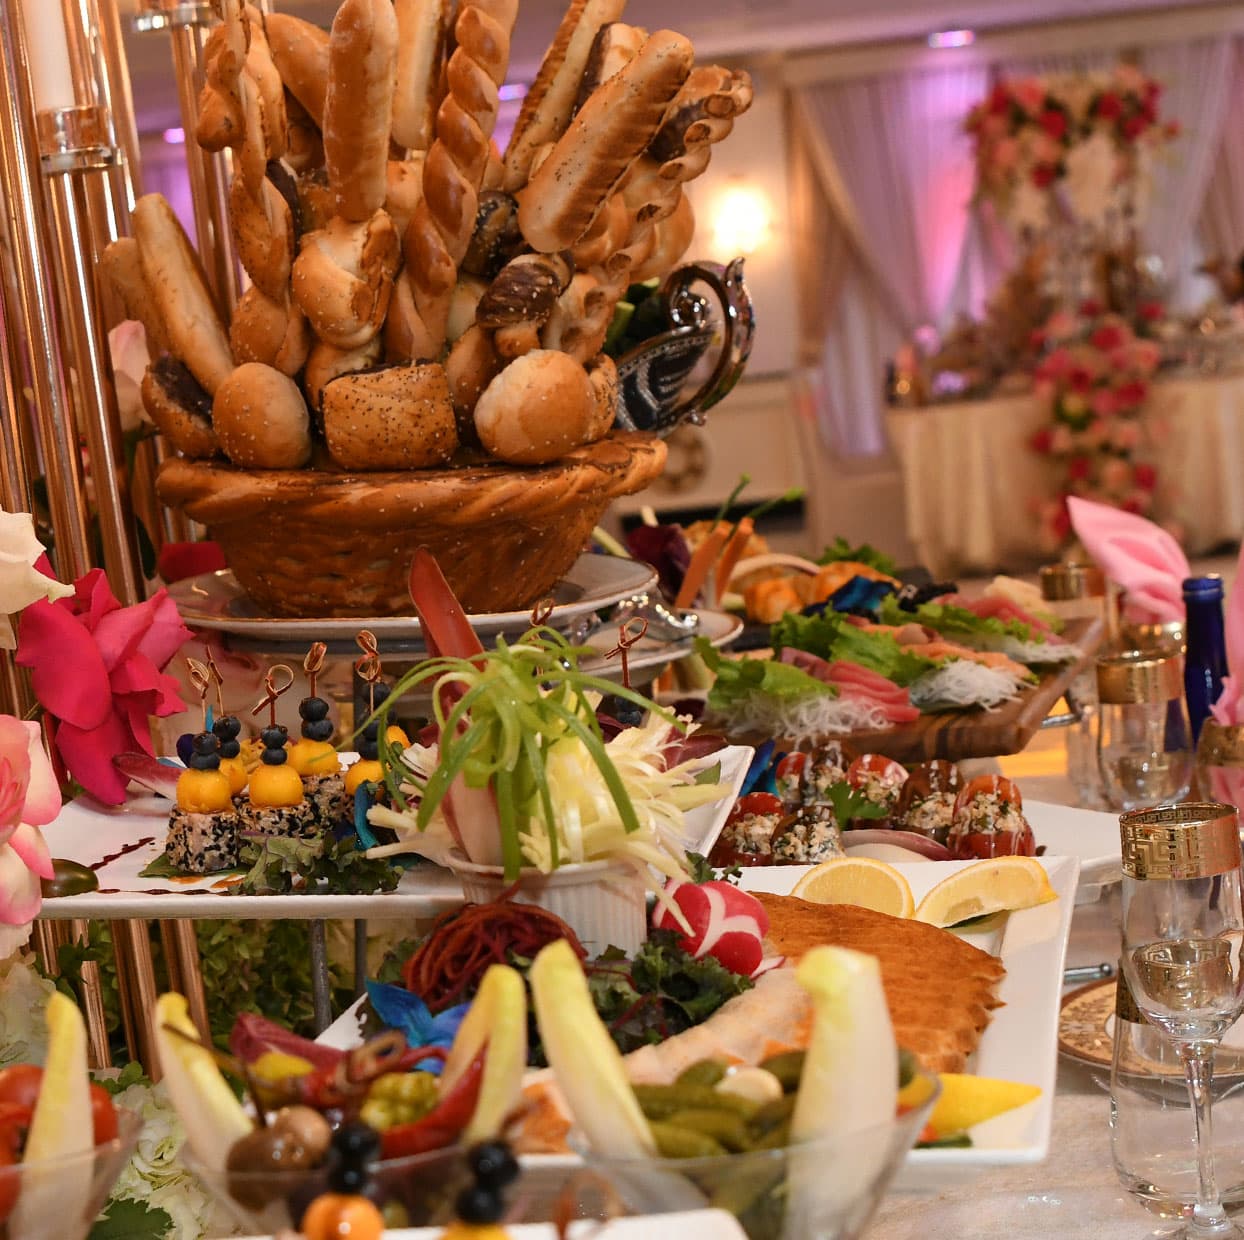 food on a table at an event